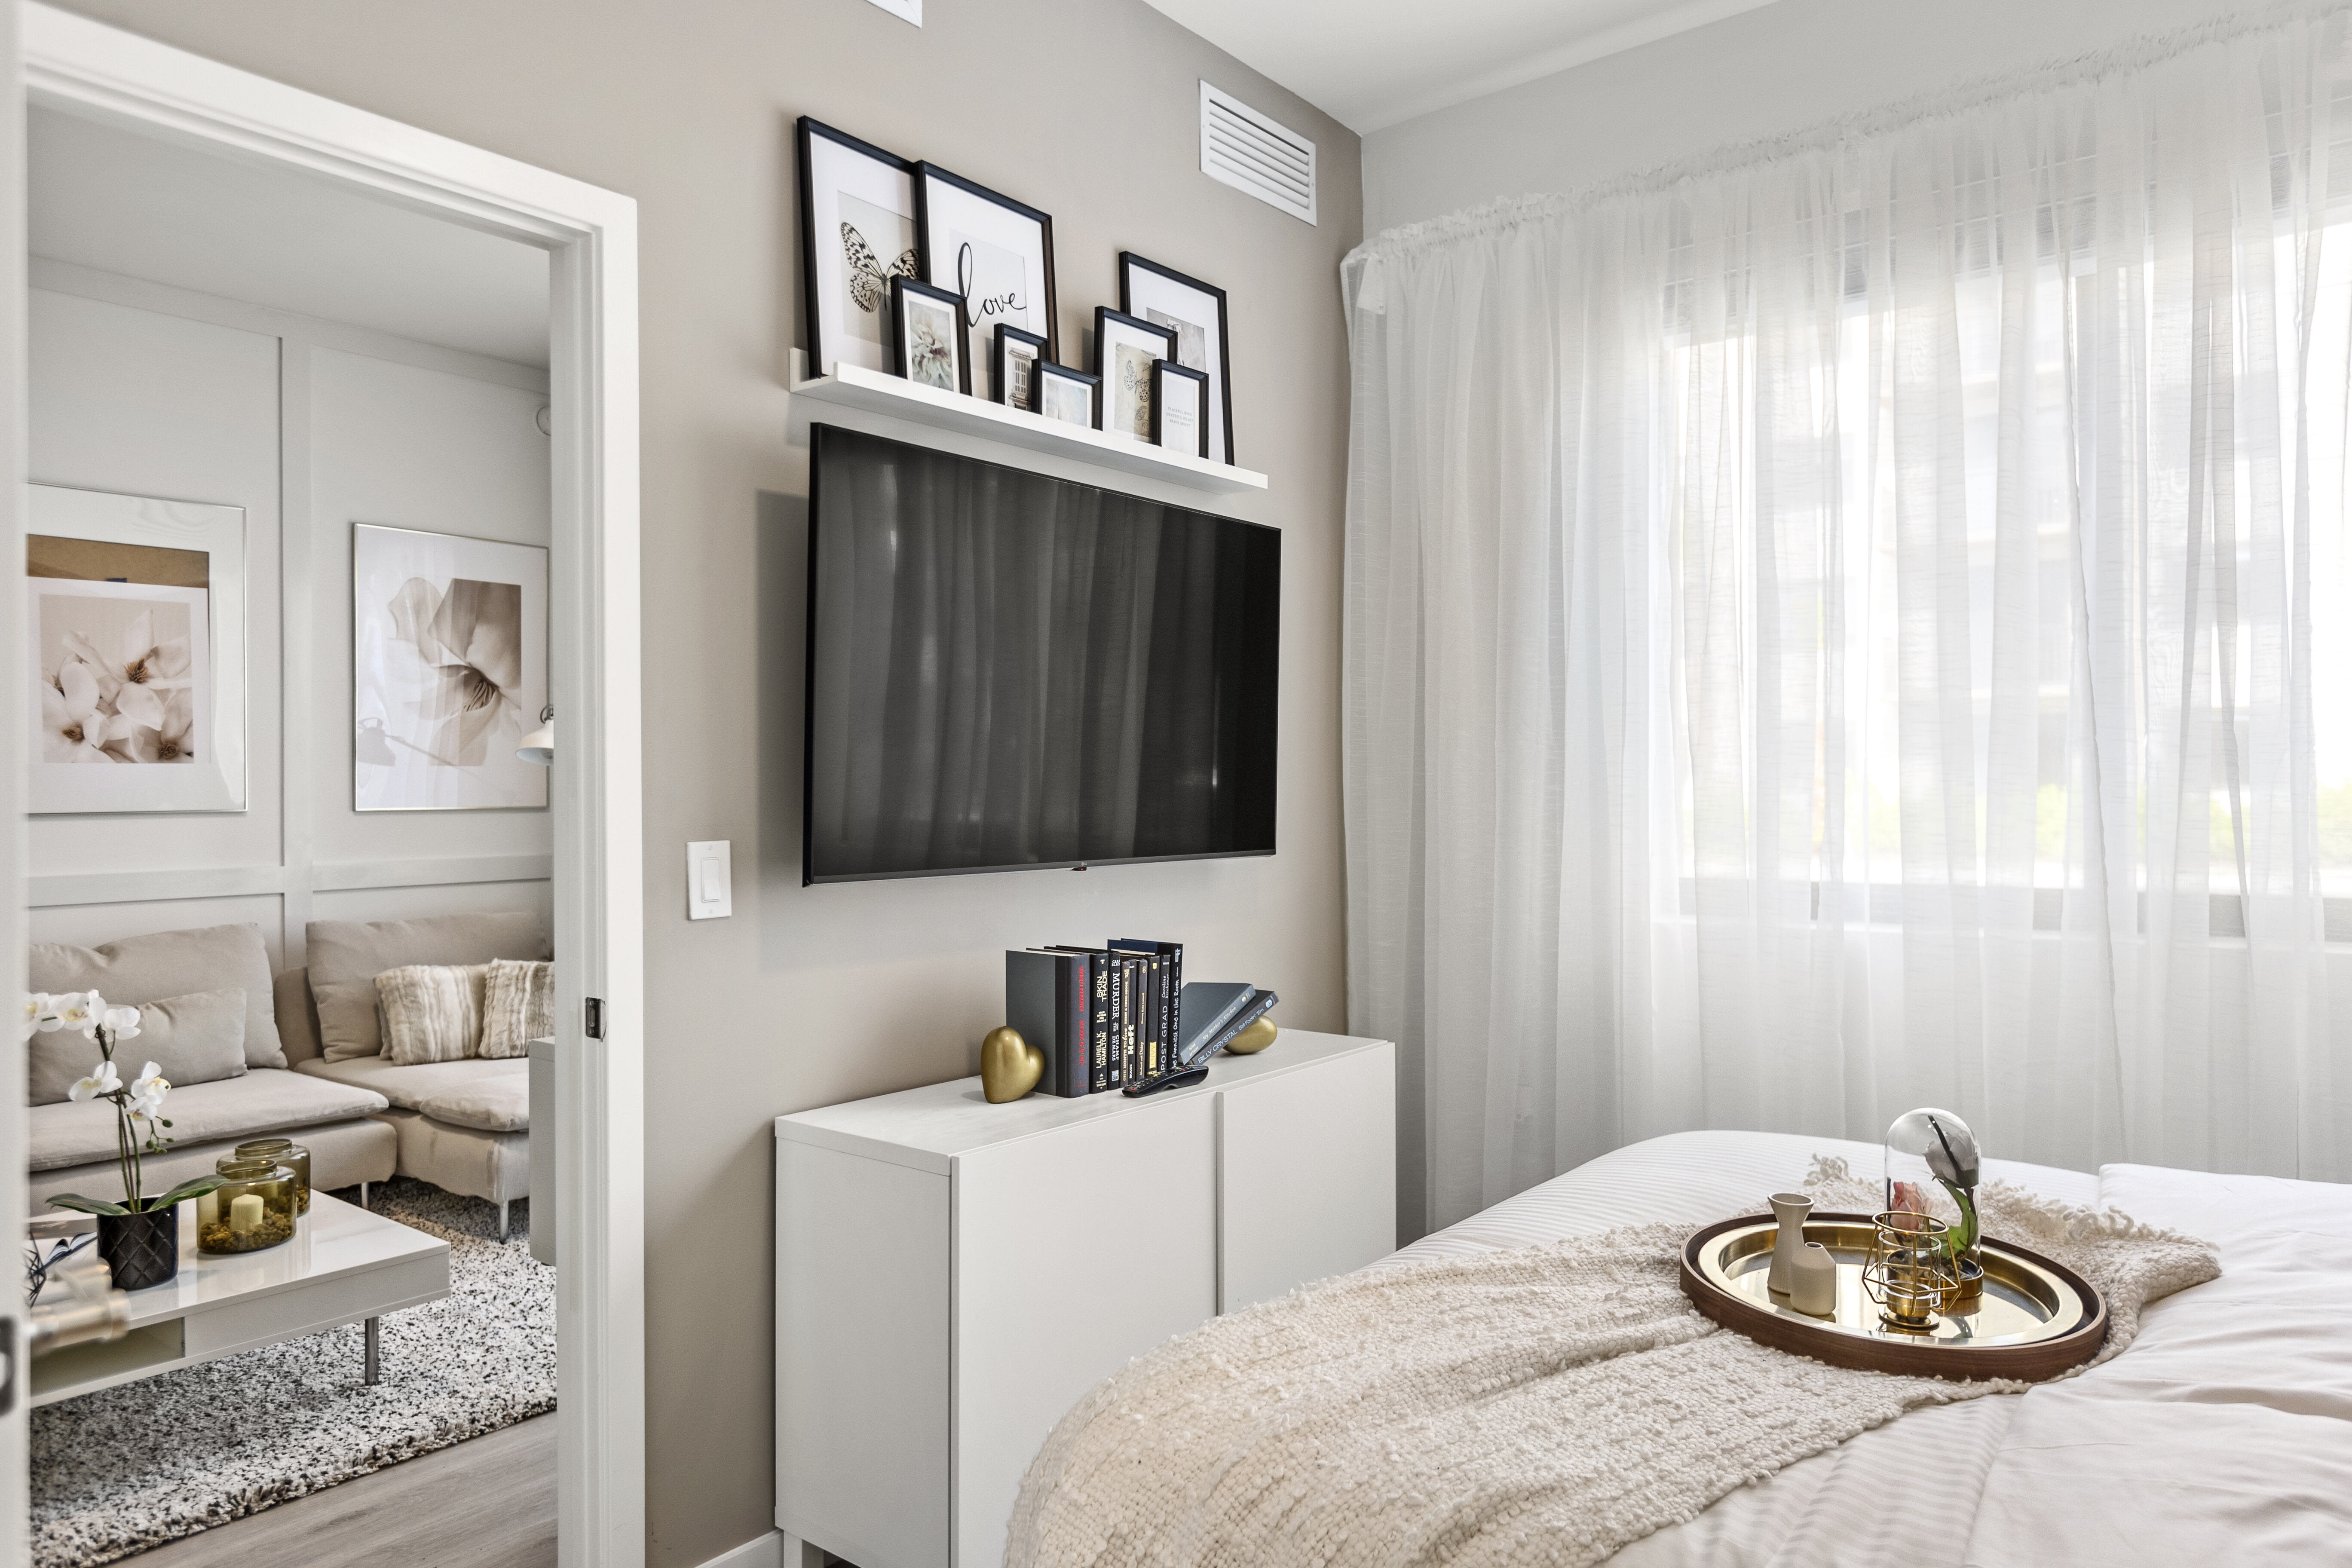 Enjoy the abundance of natural light and sleek modern furnishings in a furnished apartment model bedroom with wood-style flooring at Pine Ridge in West Palm Beach, Florida